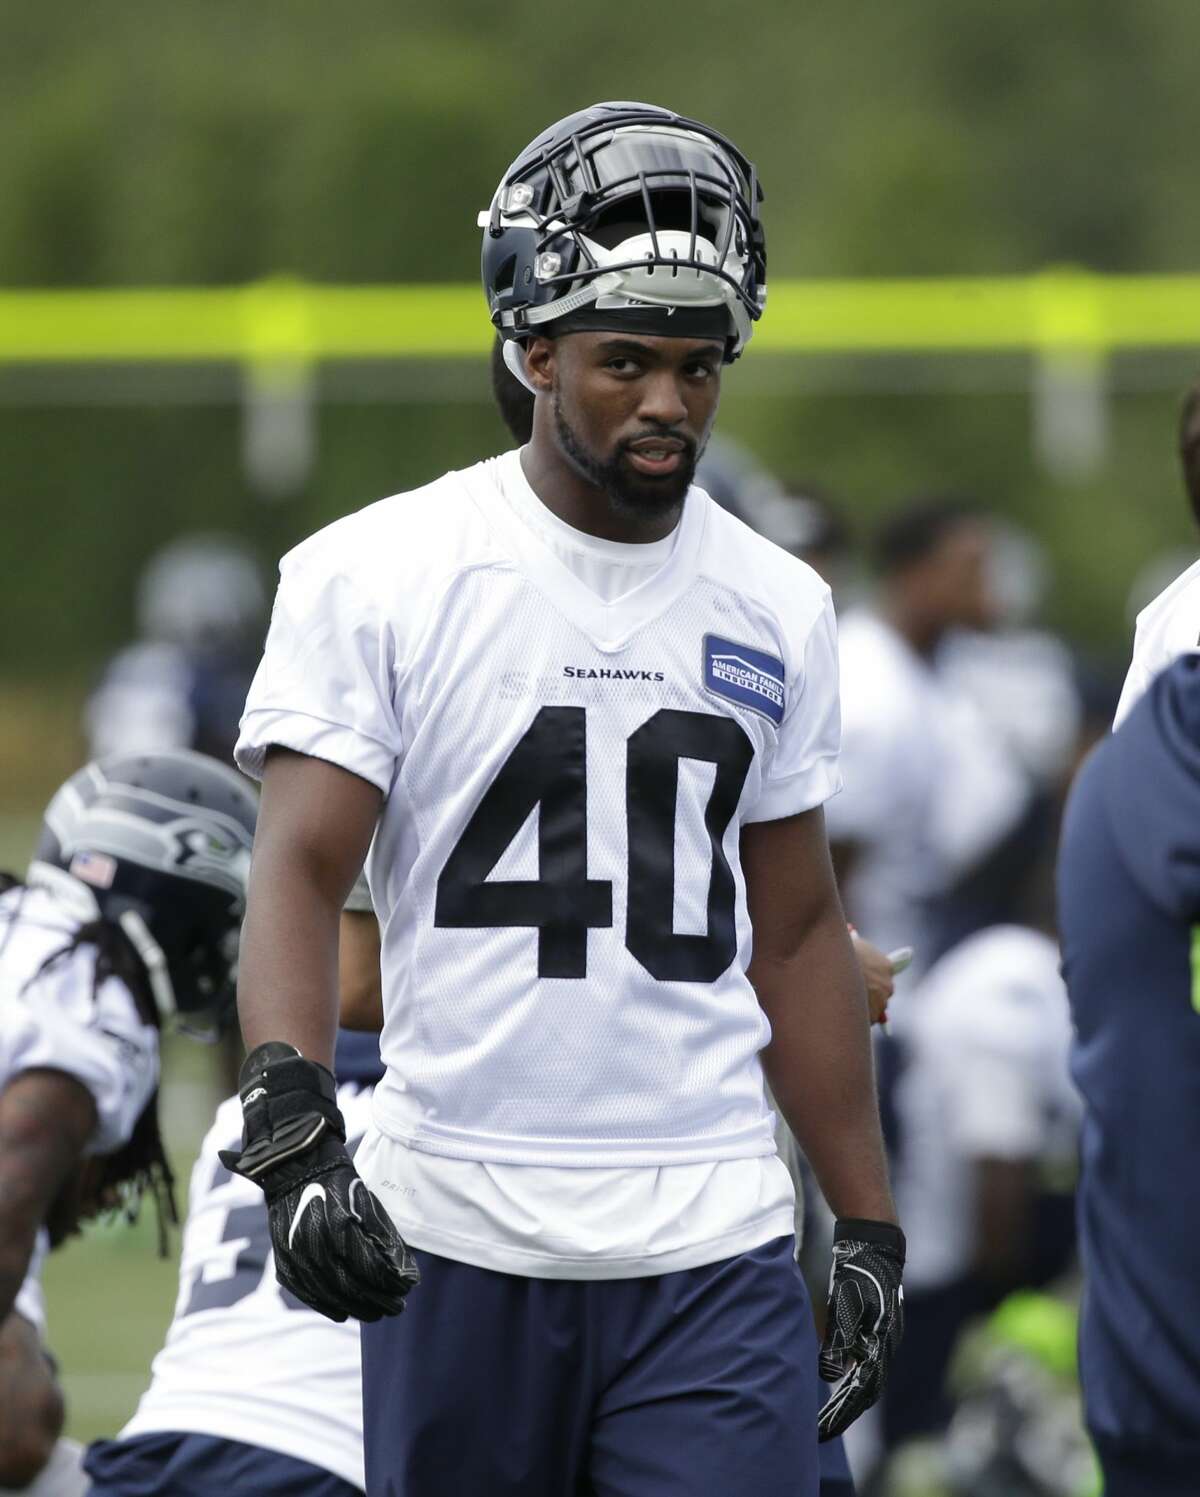 6. DB Tyvis Powell At 6-foot-3 and 211 pounds with long arms, Powell looks the part of a Seahawks defensive back after a solid college career at Ohio State. The Seahawks coaching staff has moved him around a bit in camp, getting him reps at cornerback and free safety in addition to his listed position of strong safety. Special teams will be absolutely huge for Powell, whose chances at a roster spot seem largely dependent on his versatility and performance in the kicking game.